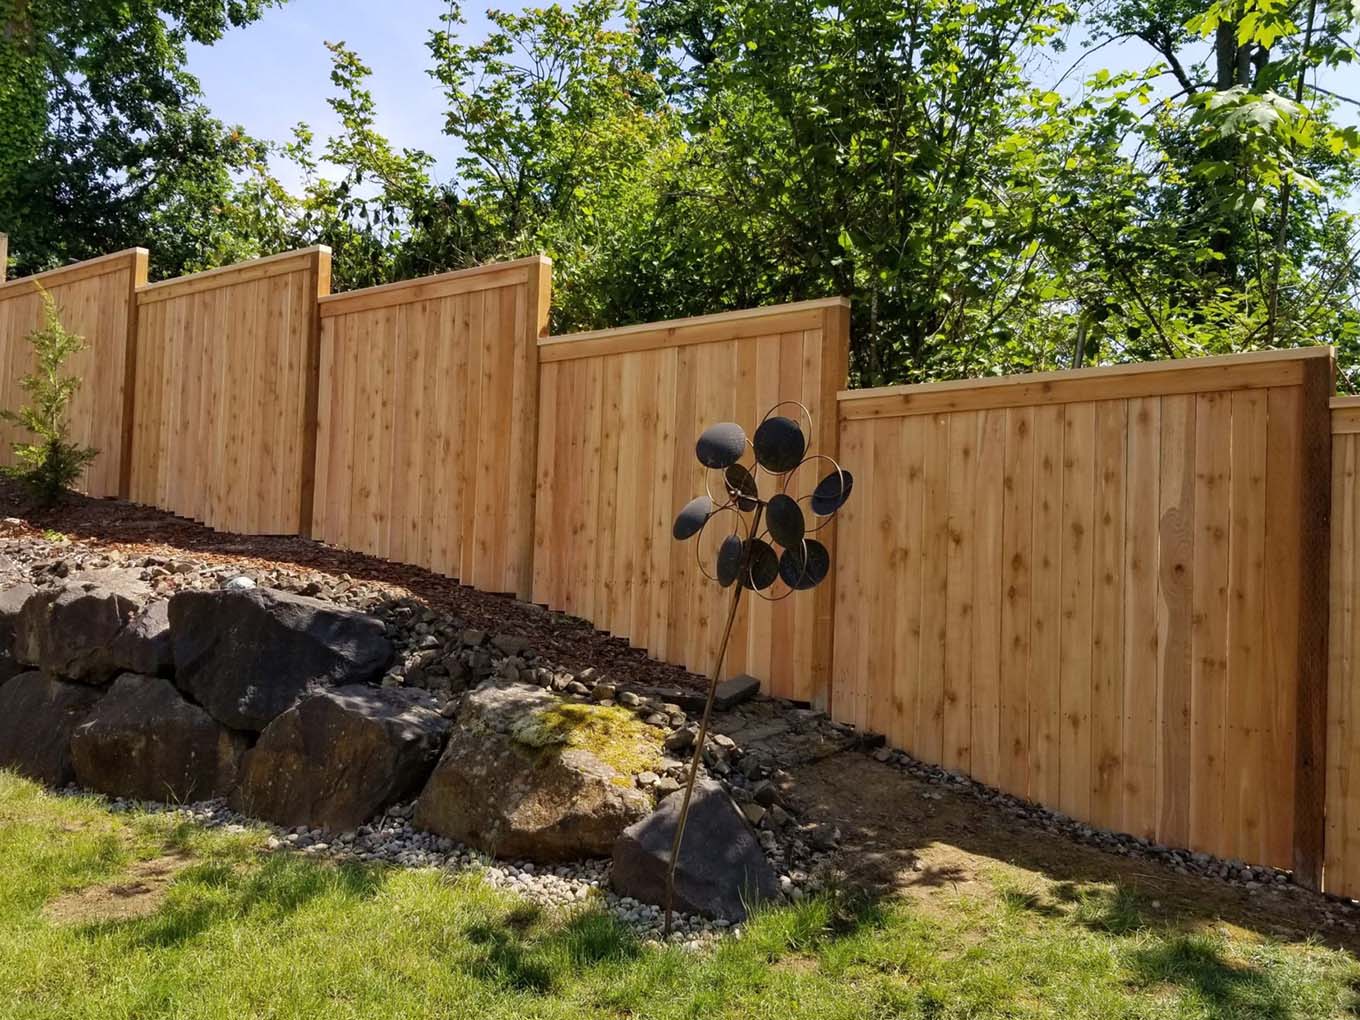 Bixby OK cap and trim style wood fence